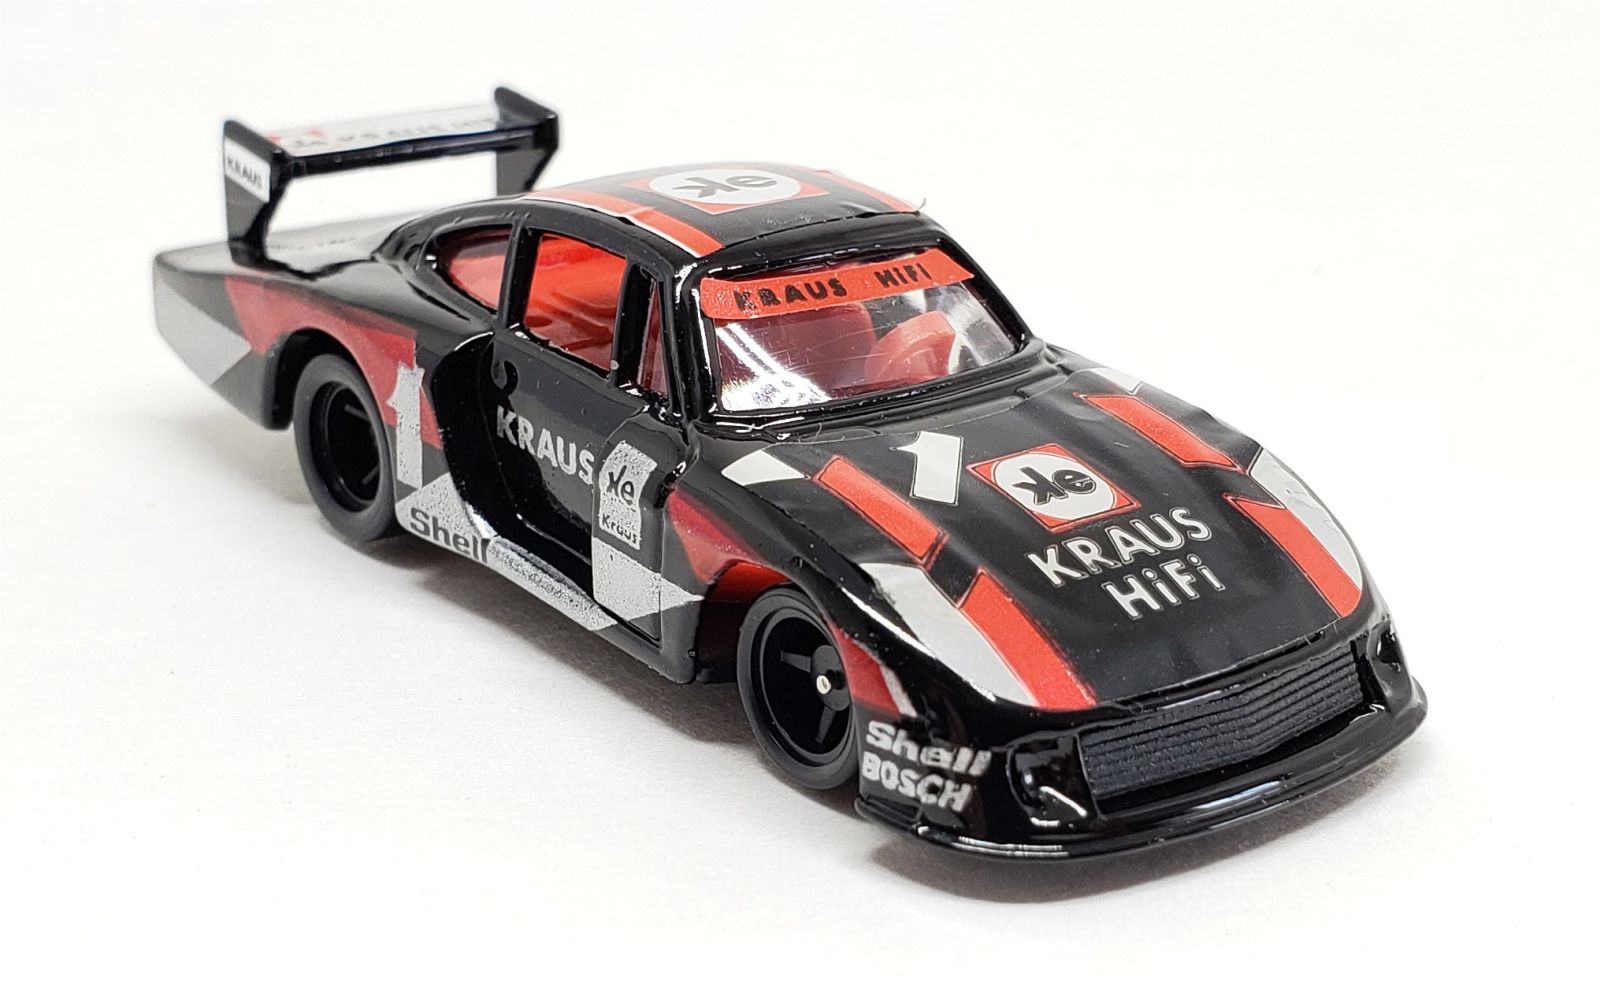 Illustration for article titled [REVIEW] Tomica Porsche 935 - 78 Turbo